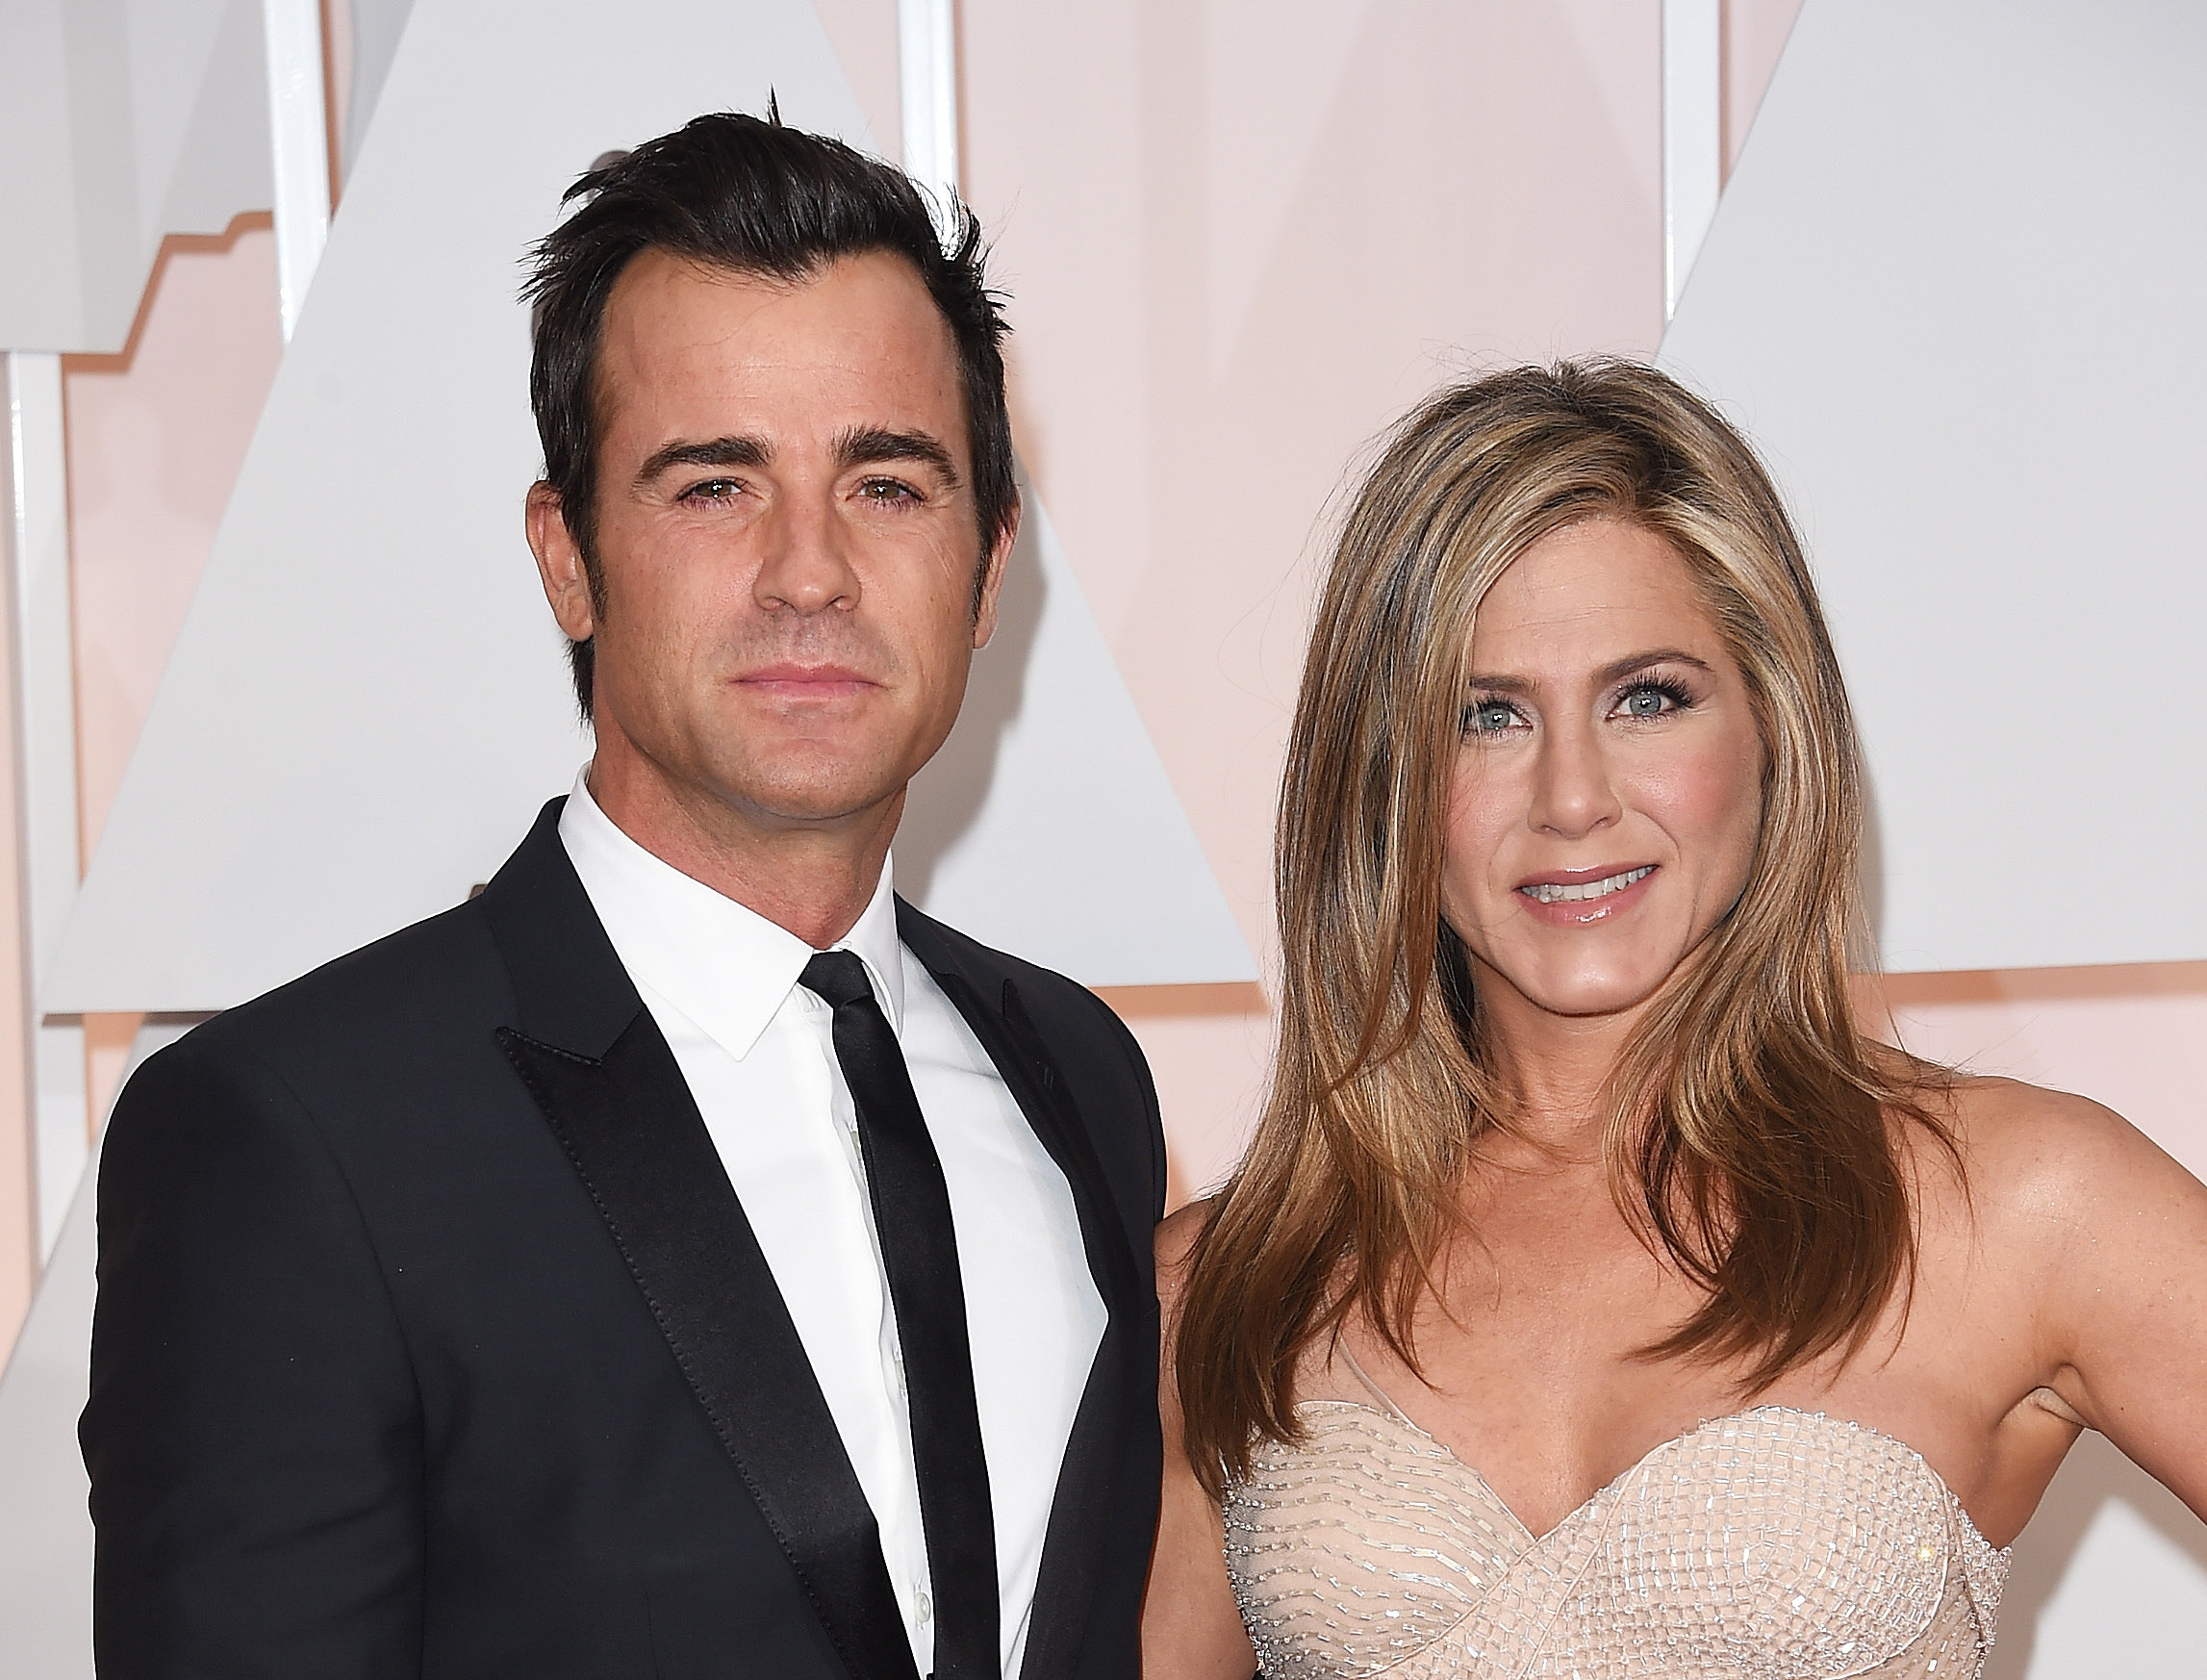 Jennifer Aniston and Justin Theroux are loved up in Paris for